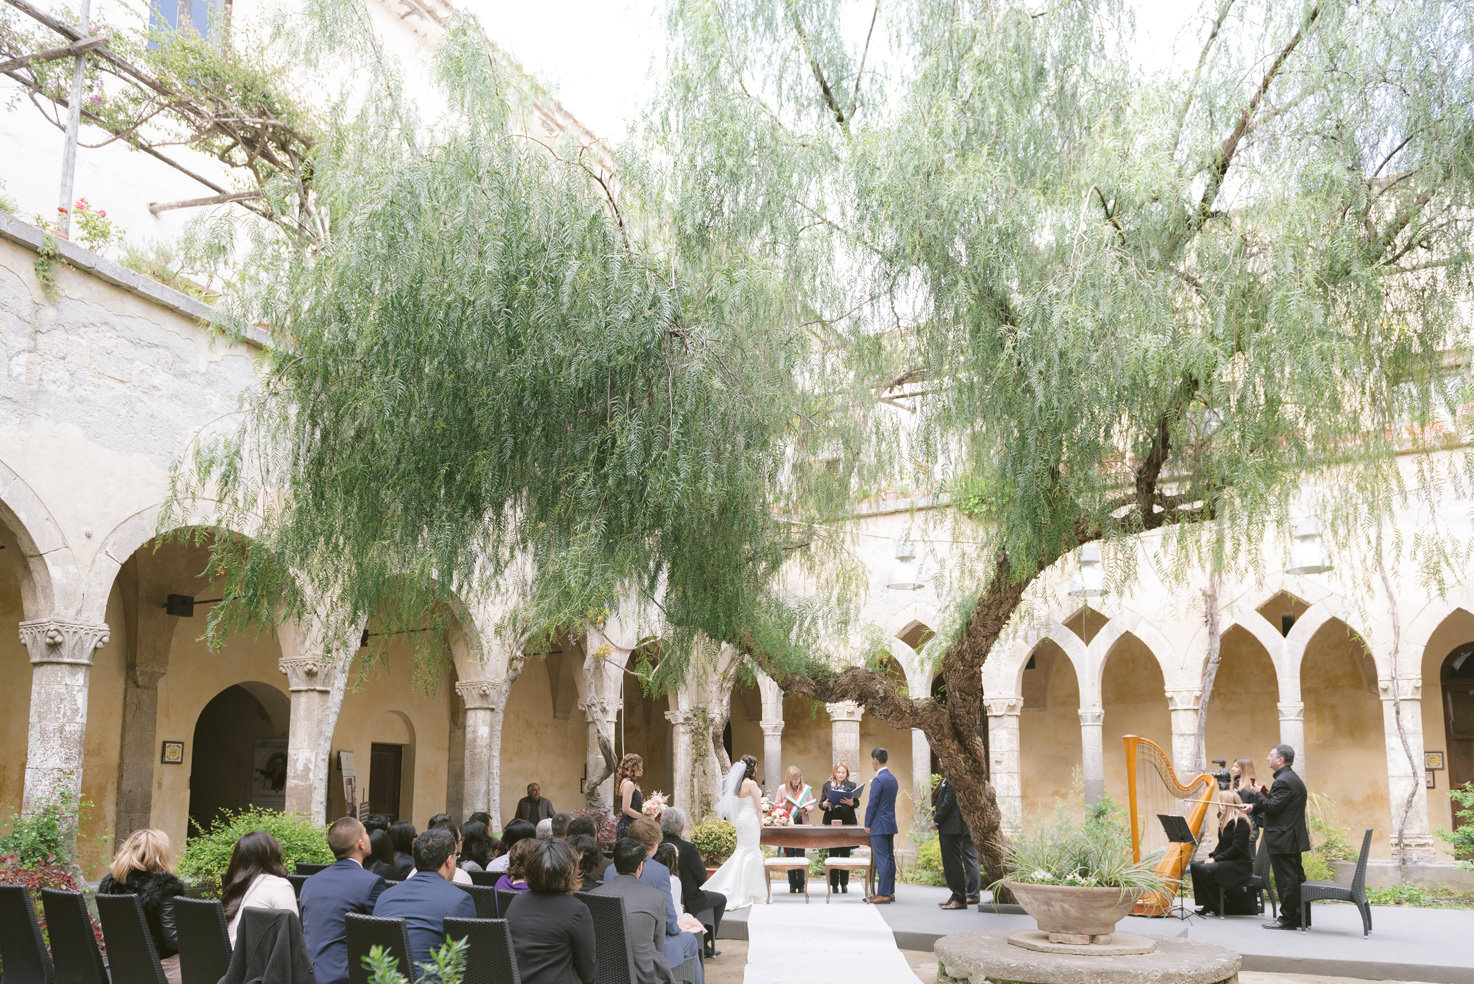 Civil ceremony in a gothic cloister in Sorrento